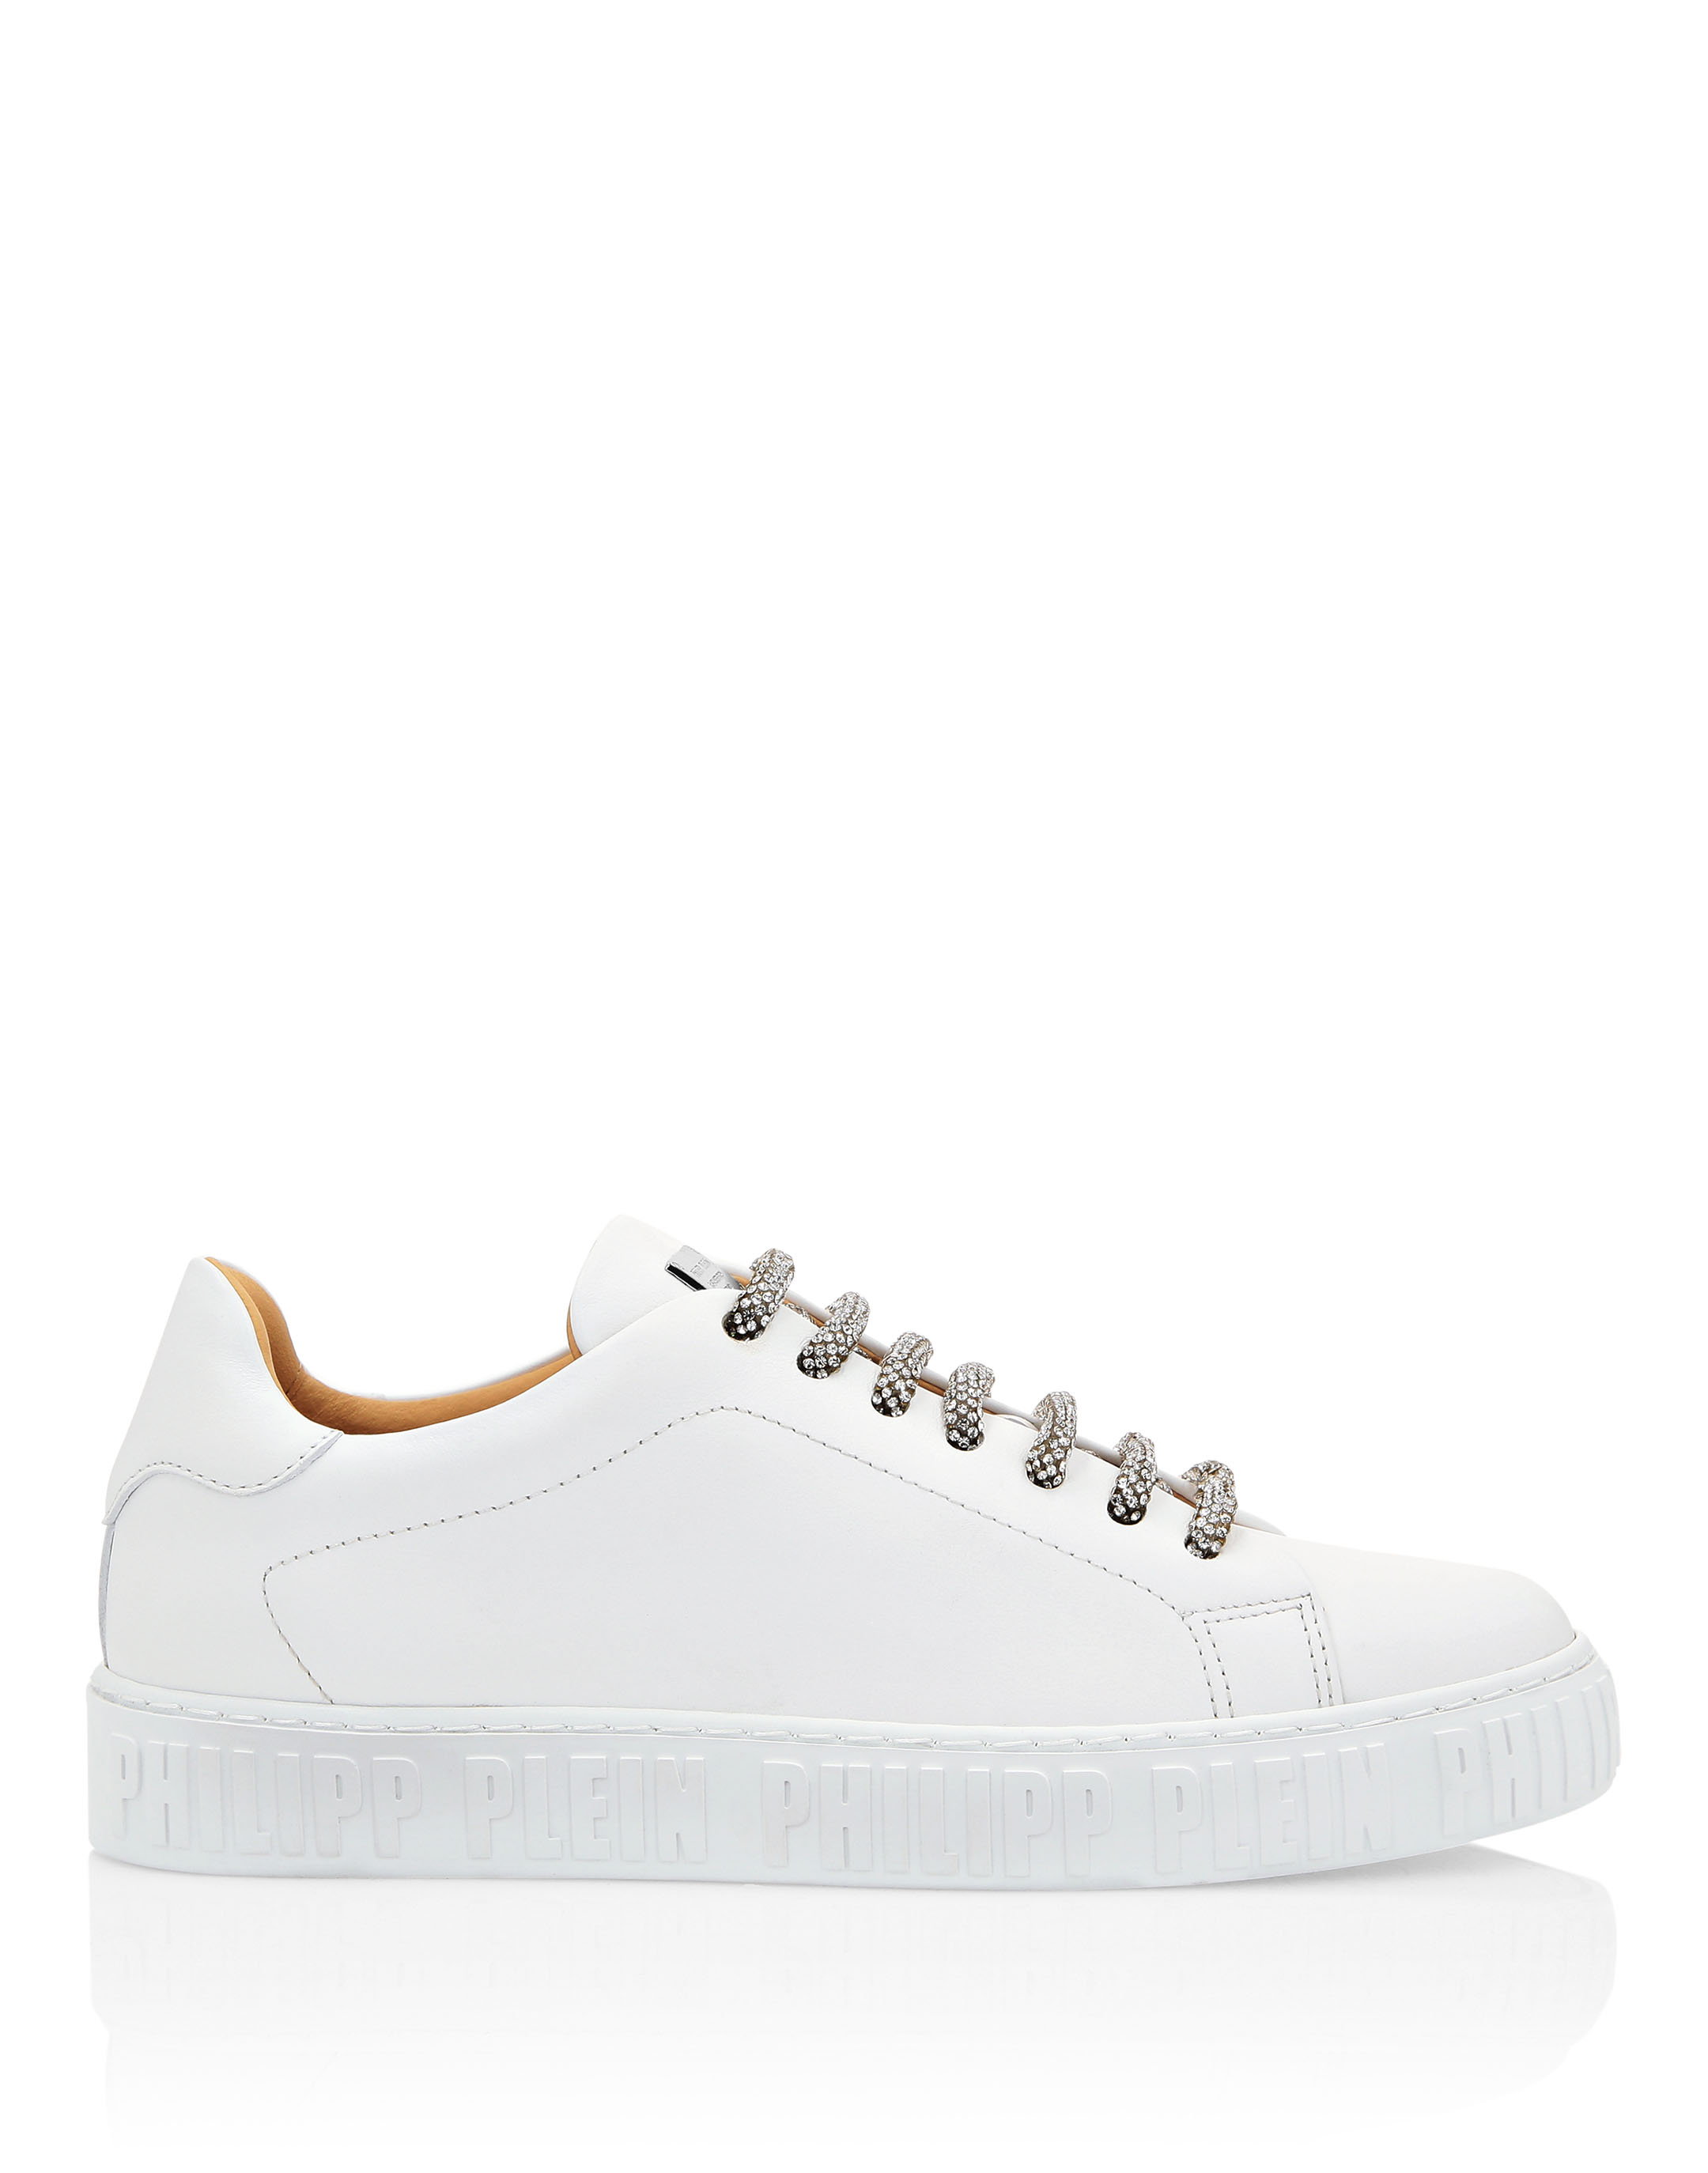 Lo-Top Sneakers Basic with Crystals | Philipp Plein Outlet